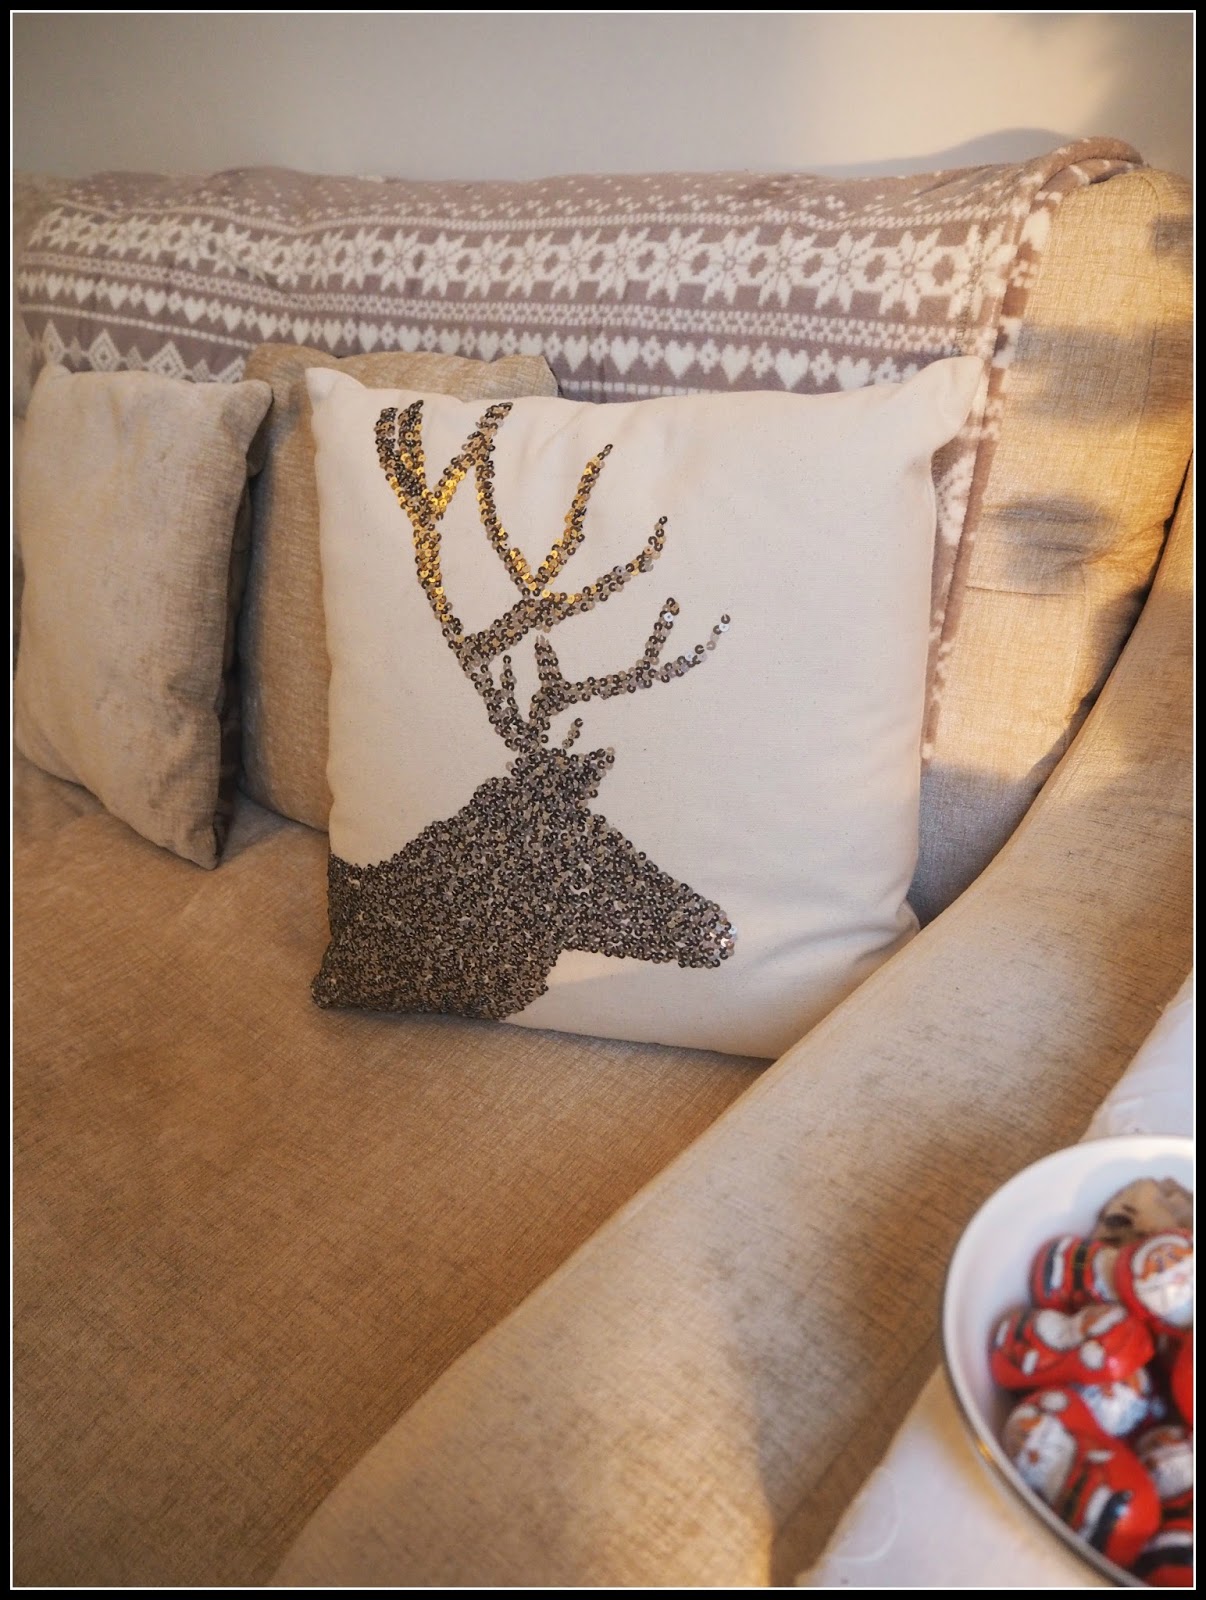 mamasVIB | V. I. BUYS: 5 Fast Ways... to style up your front room this Christmas, christmas decorations, debenhams christmas shop, debenhams, interiors, styling, christmas decorating, simple tricks to dress up front room, living room style, christmas decs, xmas rooms, shopping, room makeover, simple makeover